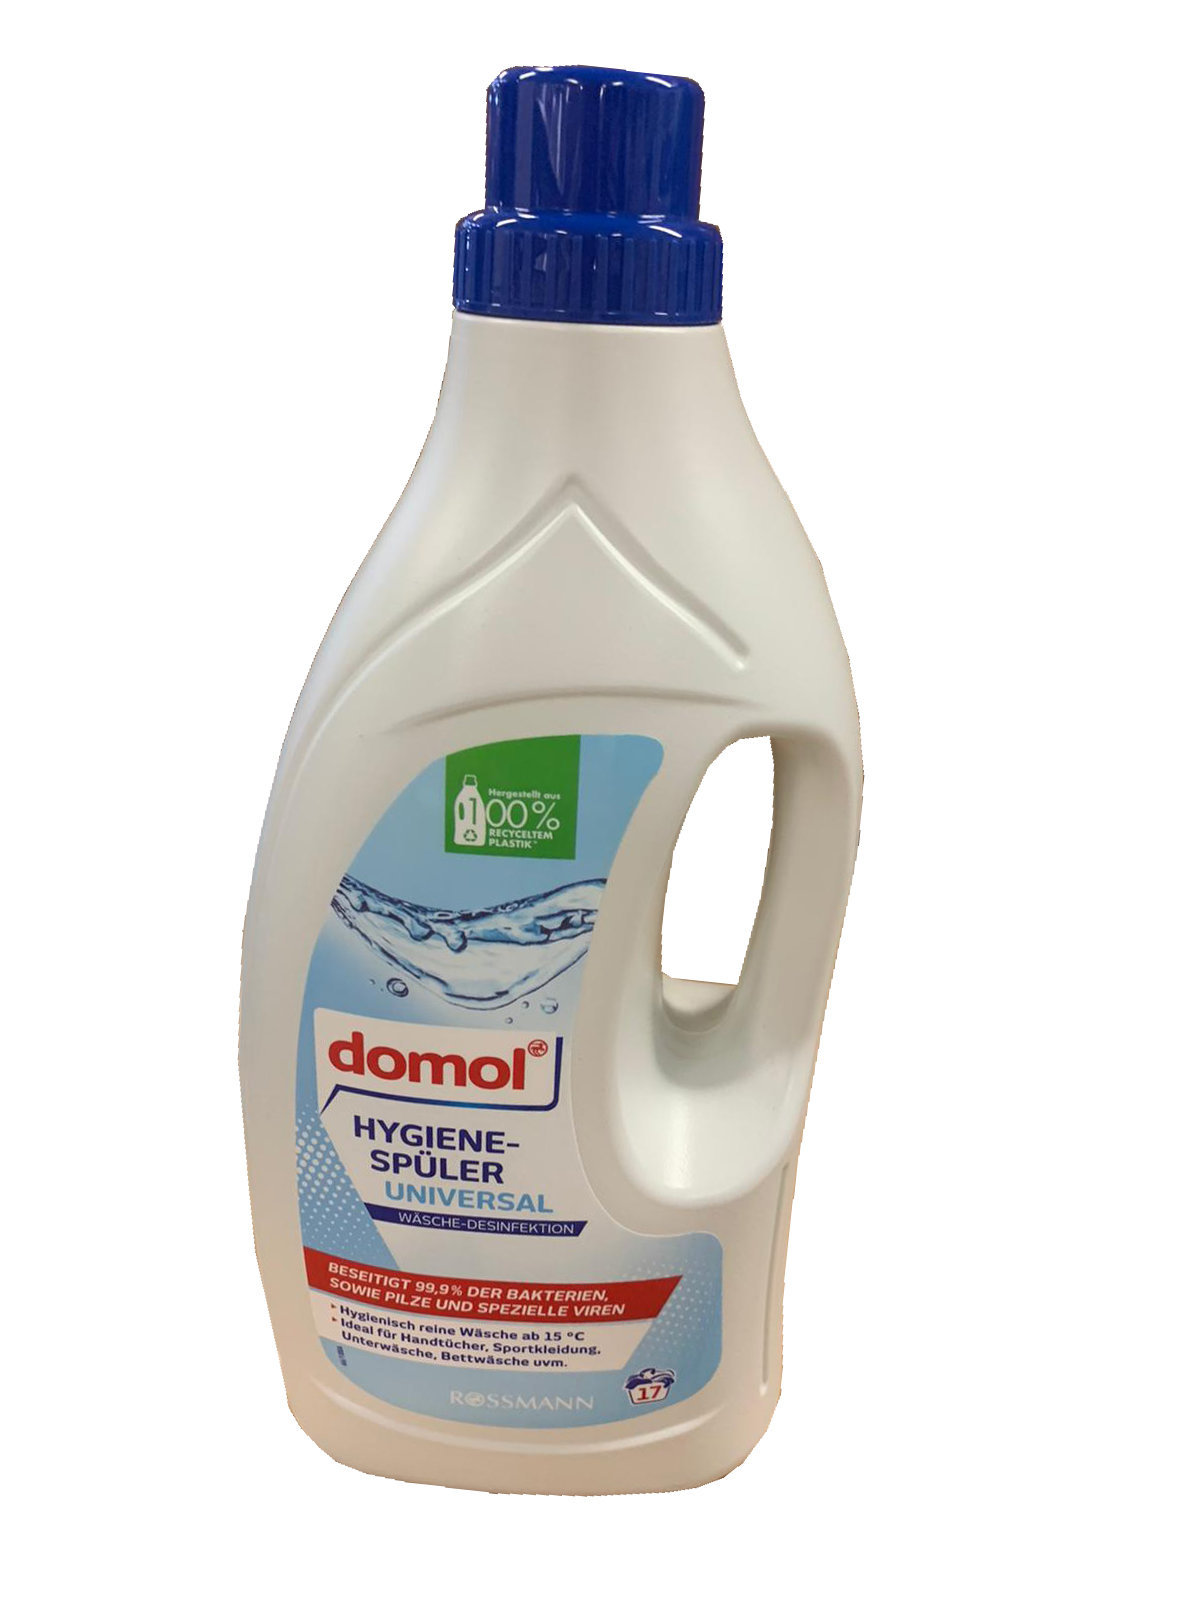 Domol Made In Germany Suitable For Adults And Babies Disinfection And Sterilization Laundry Detergent 1 5l Hktvmall Online Shopping